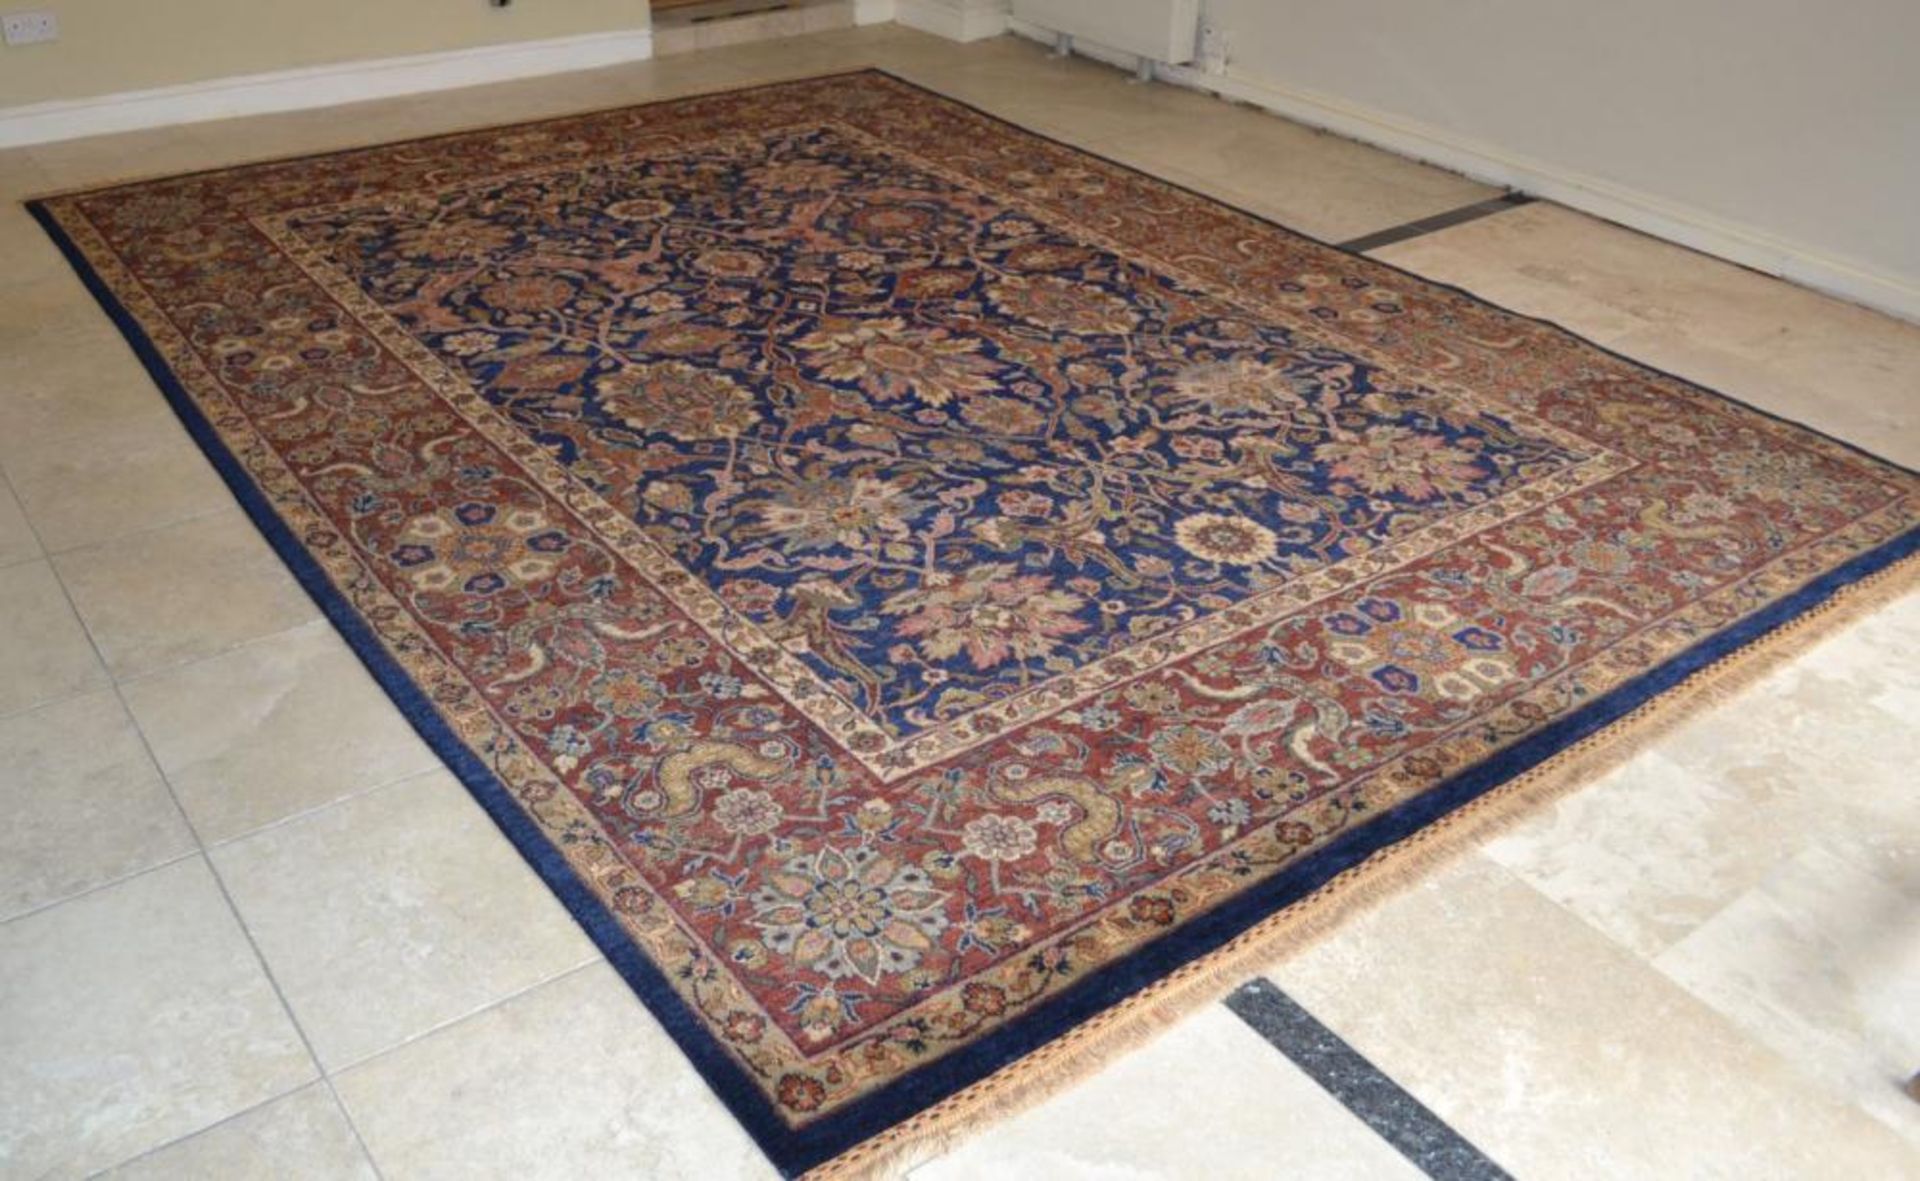 1 x Fine Indian Vegetable Dyed Handmade Carpet in Navy and Rust - All Wool With Cotton Foundation - - Image 10 of 22